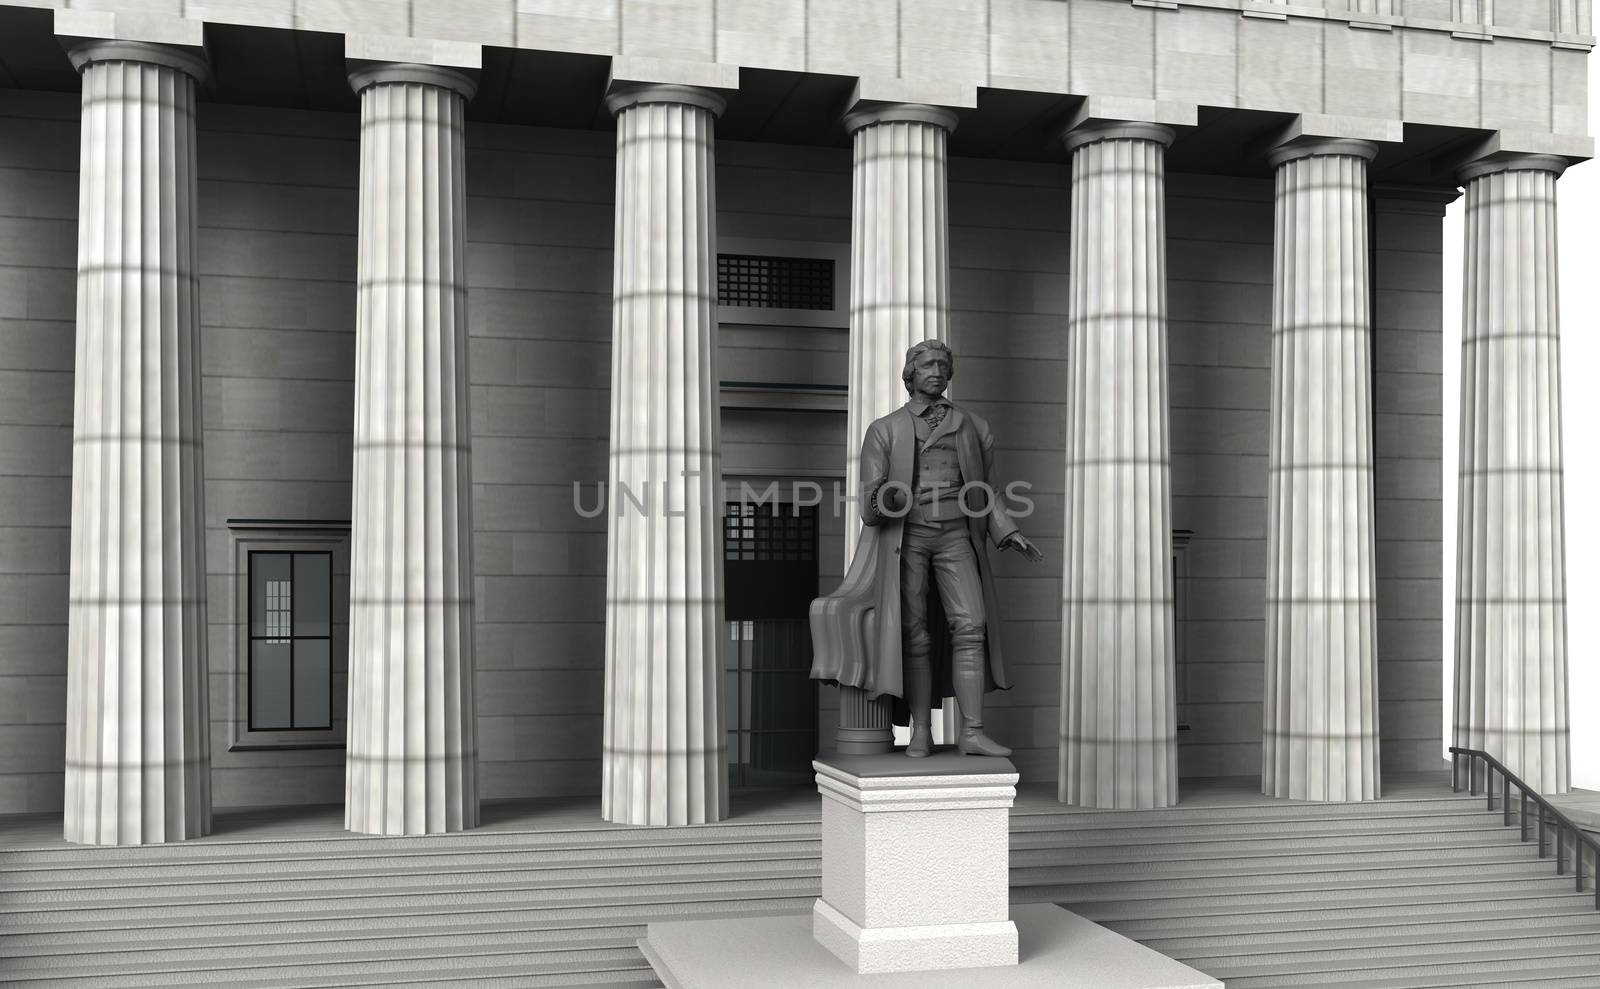 Federal Hall was the first capitol building of the United States of America